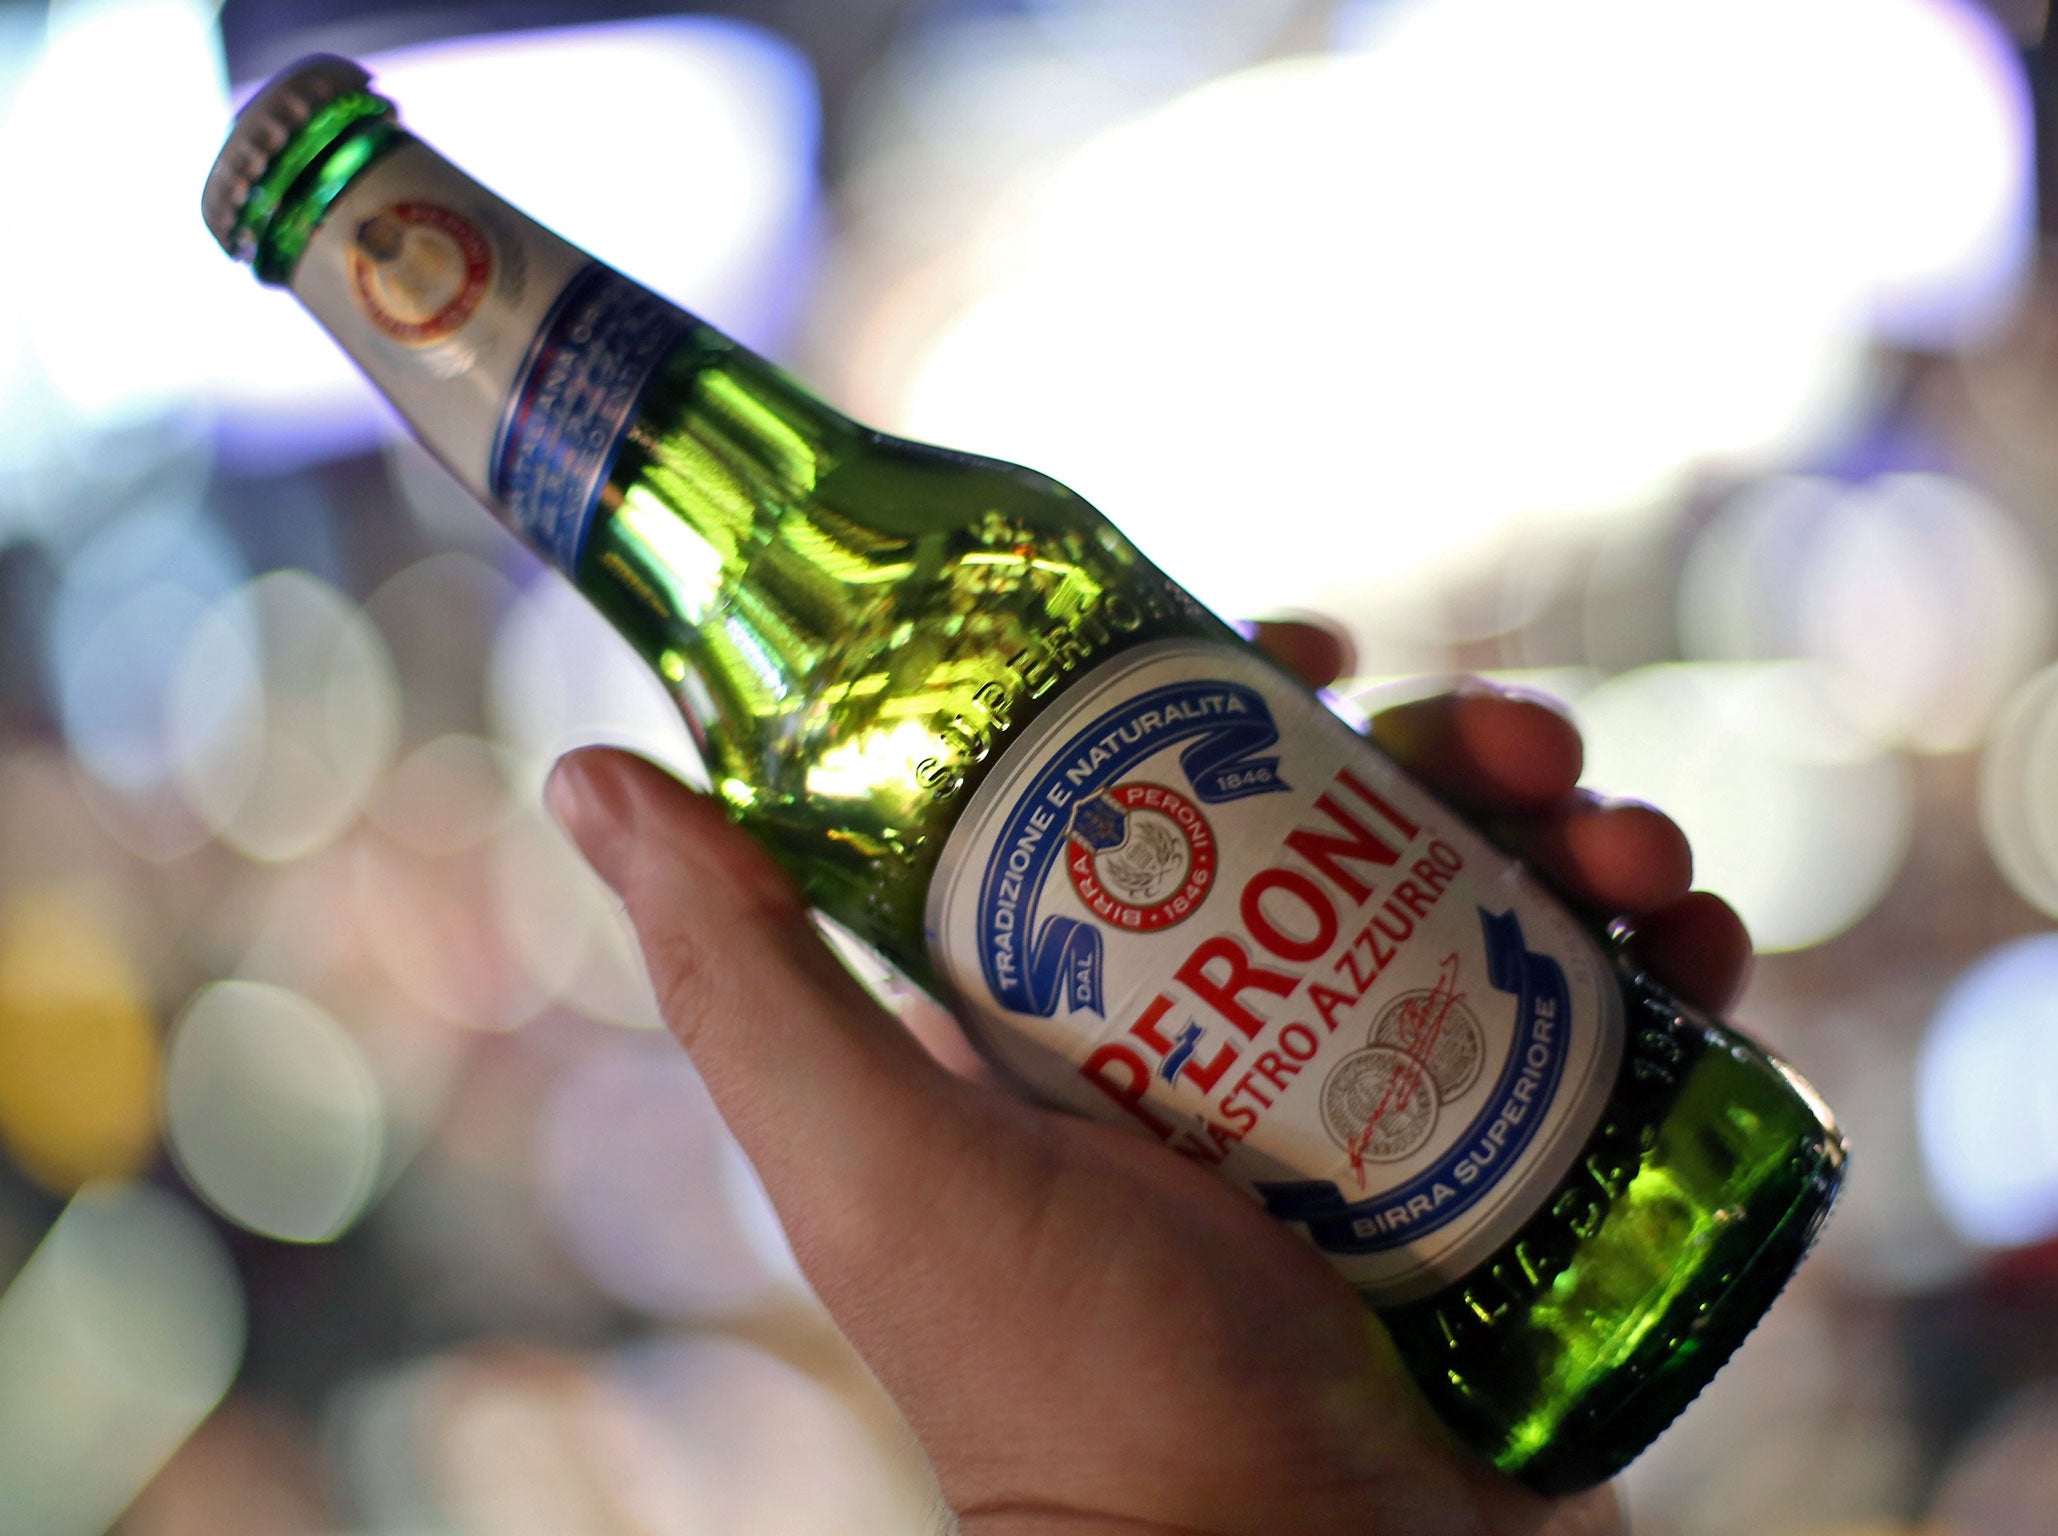 AB Inbev plans to put Peroni and Grolsch up for sale when it acquires SAB Miller